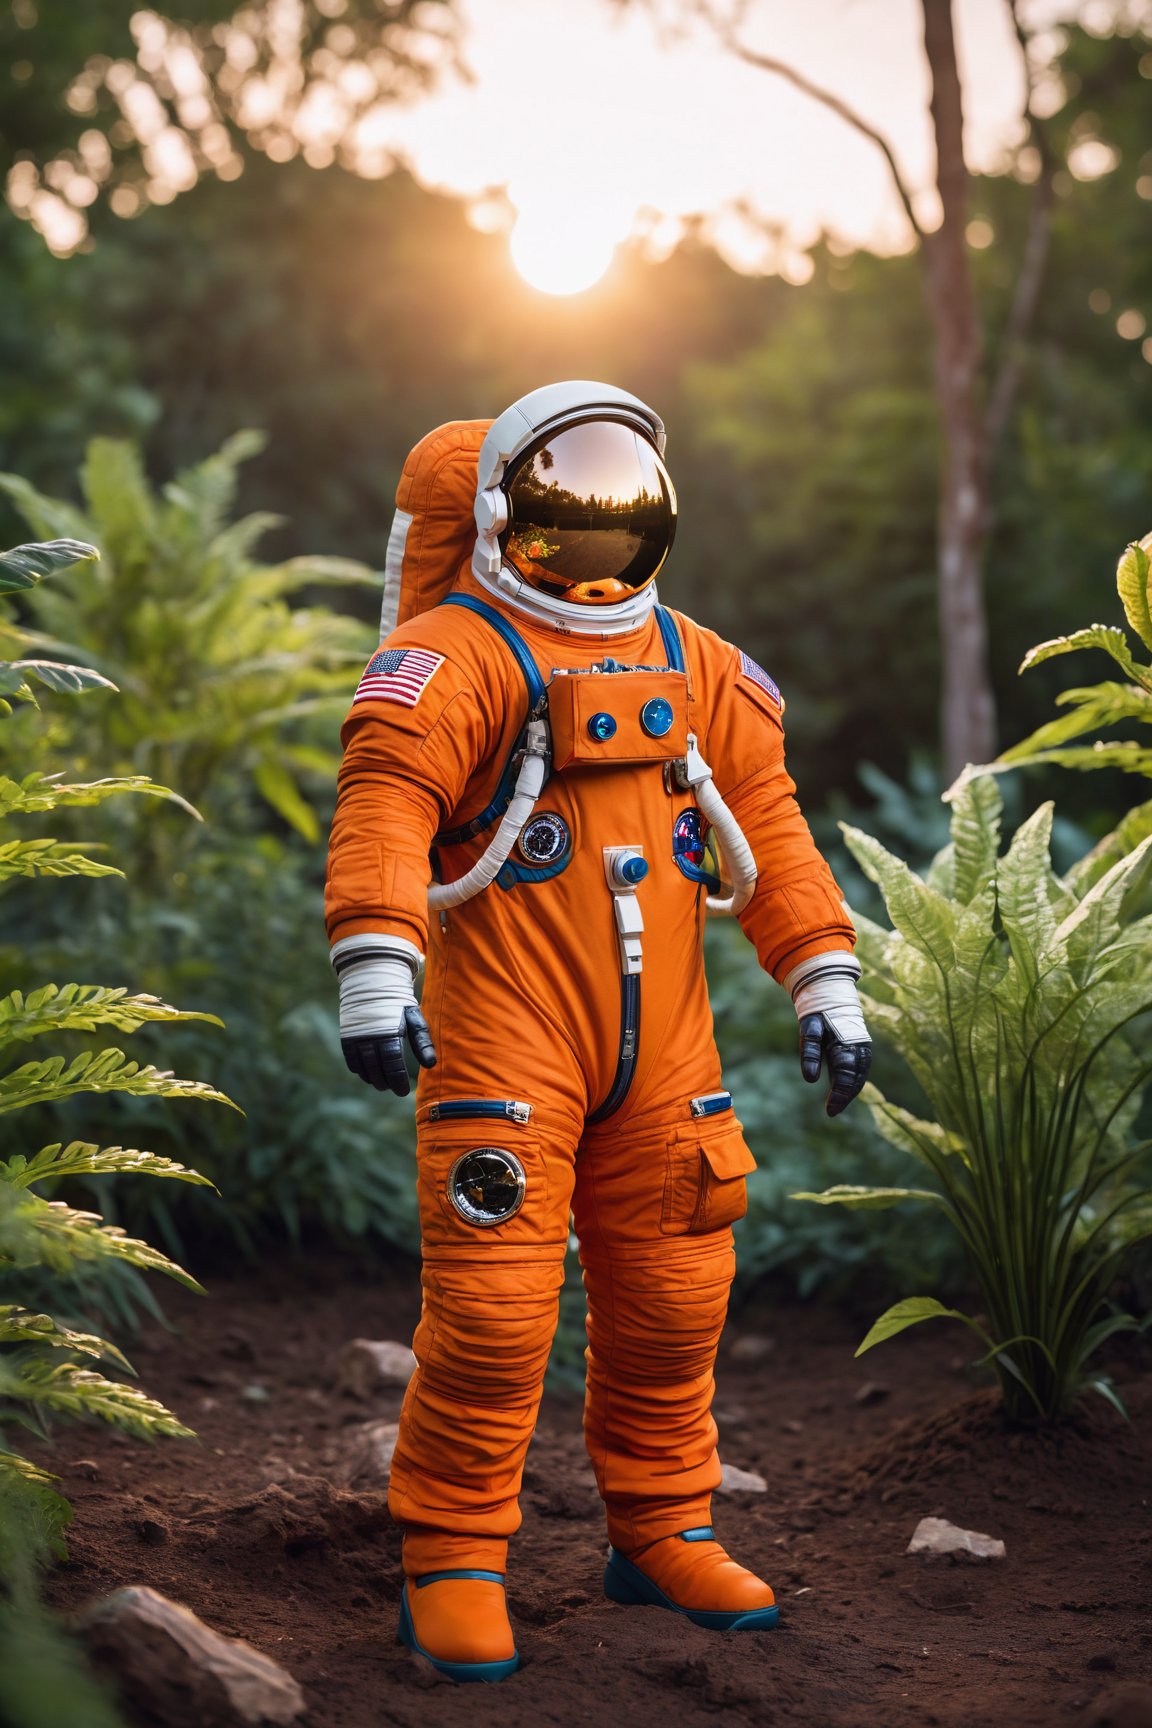 An astronaut in an orange astronaut outfit, standing against a sunset background. The astronaut is positioned front facing and is shown from the waist up. The sunset provides a warm and vibrant color palette. The scene is surrounded by lush plants, adding a touch of nature to the composition. The image quality is top-notch and high-resolution, with ultra-detailed features. The style of the artwork is realistic, with vivid colors and professional craftsmanship. The lighting accentuates the astronaut's figure, creating a captivating atmosphere.